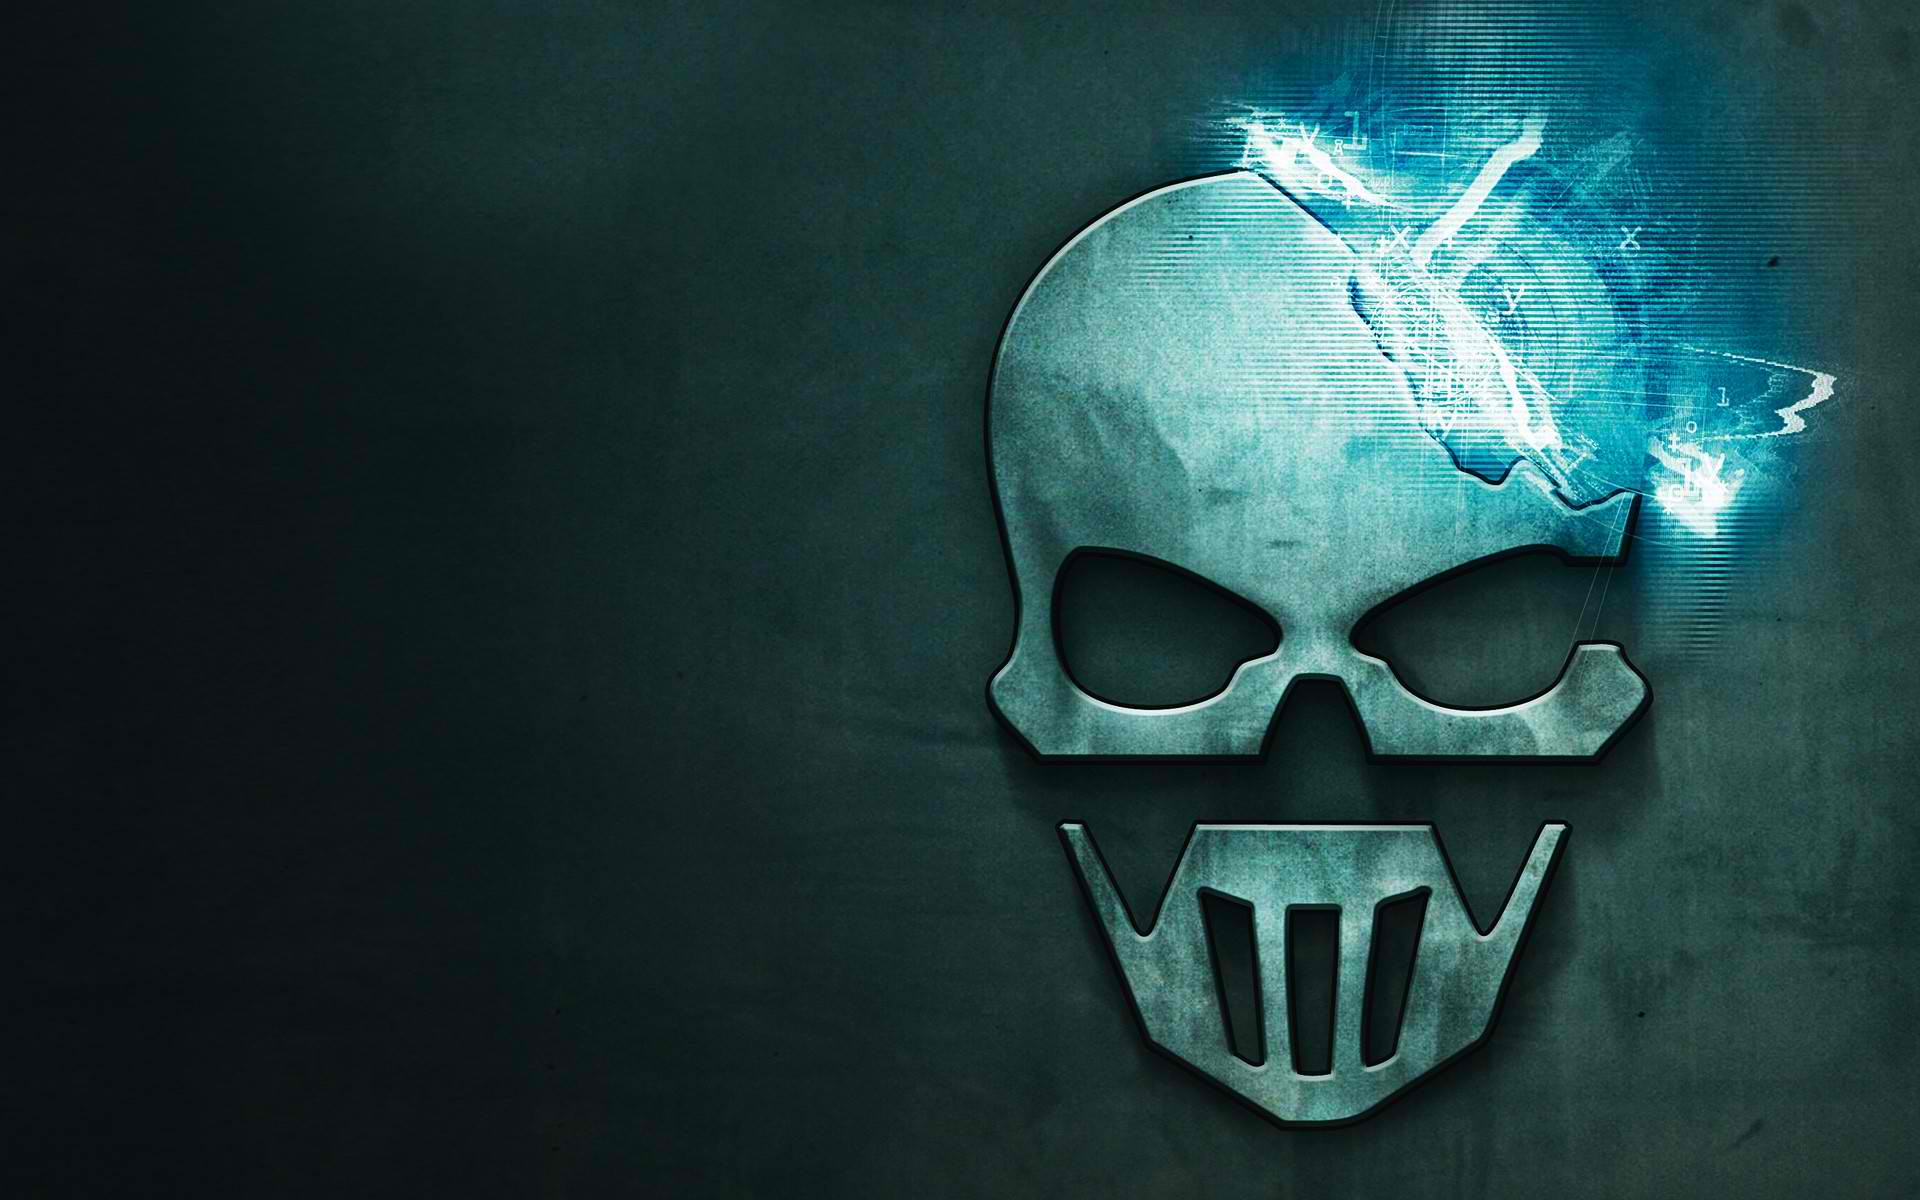 logo, video game, tom clancy's ghost recon: future soldier, skull